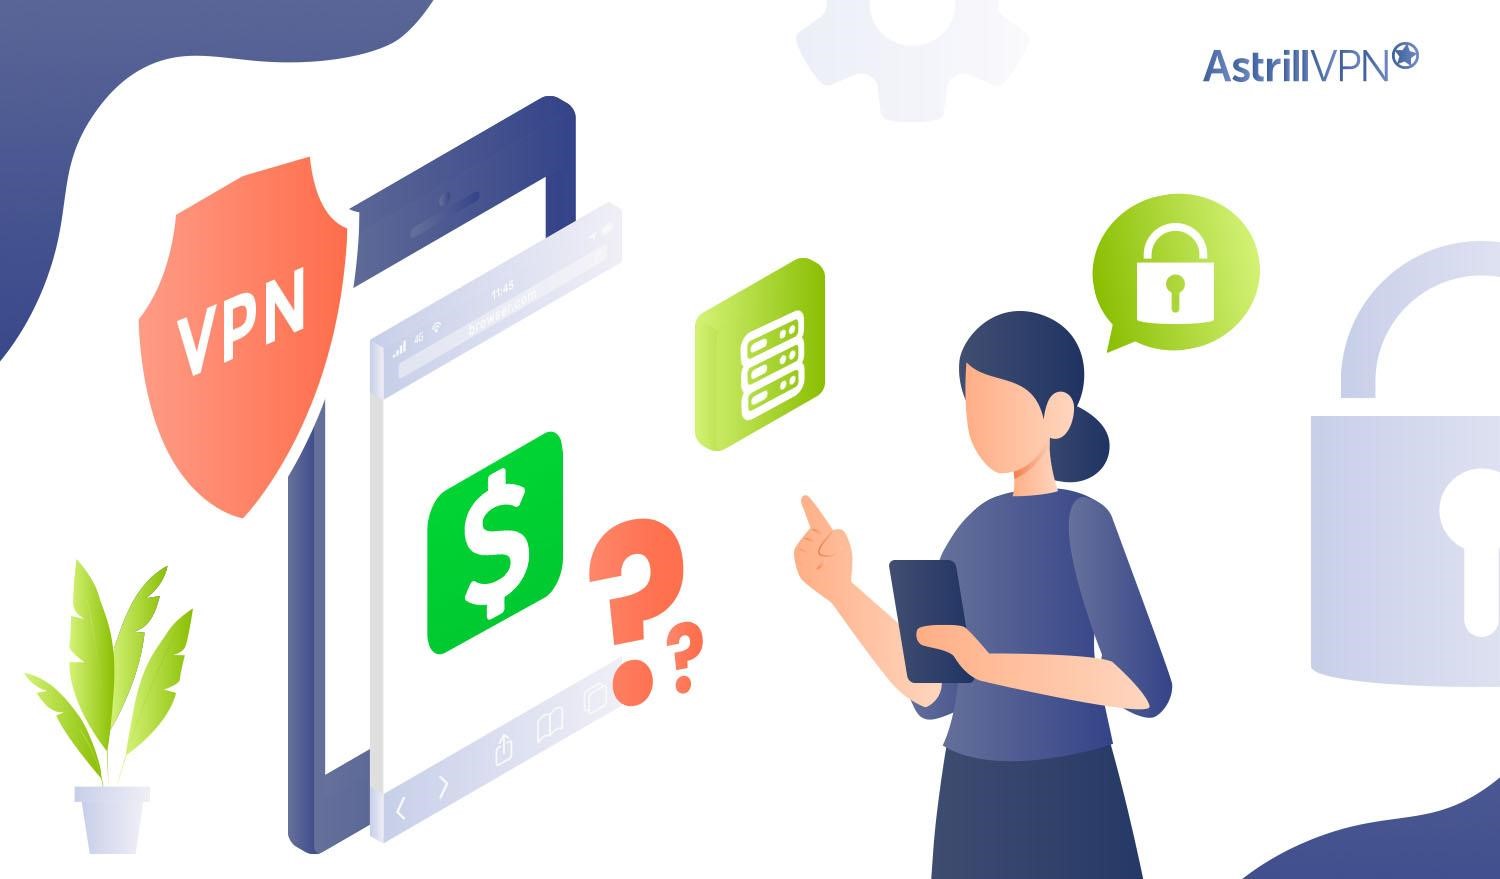 Features Should You Look For in the Cash App VPN